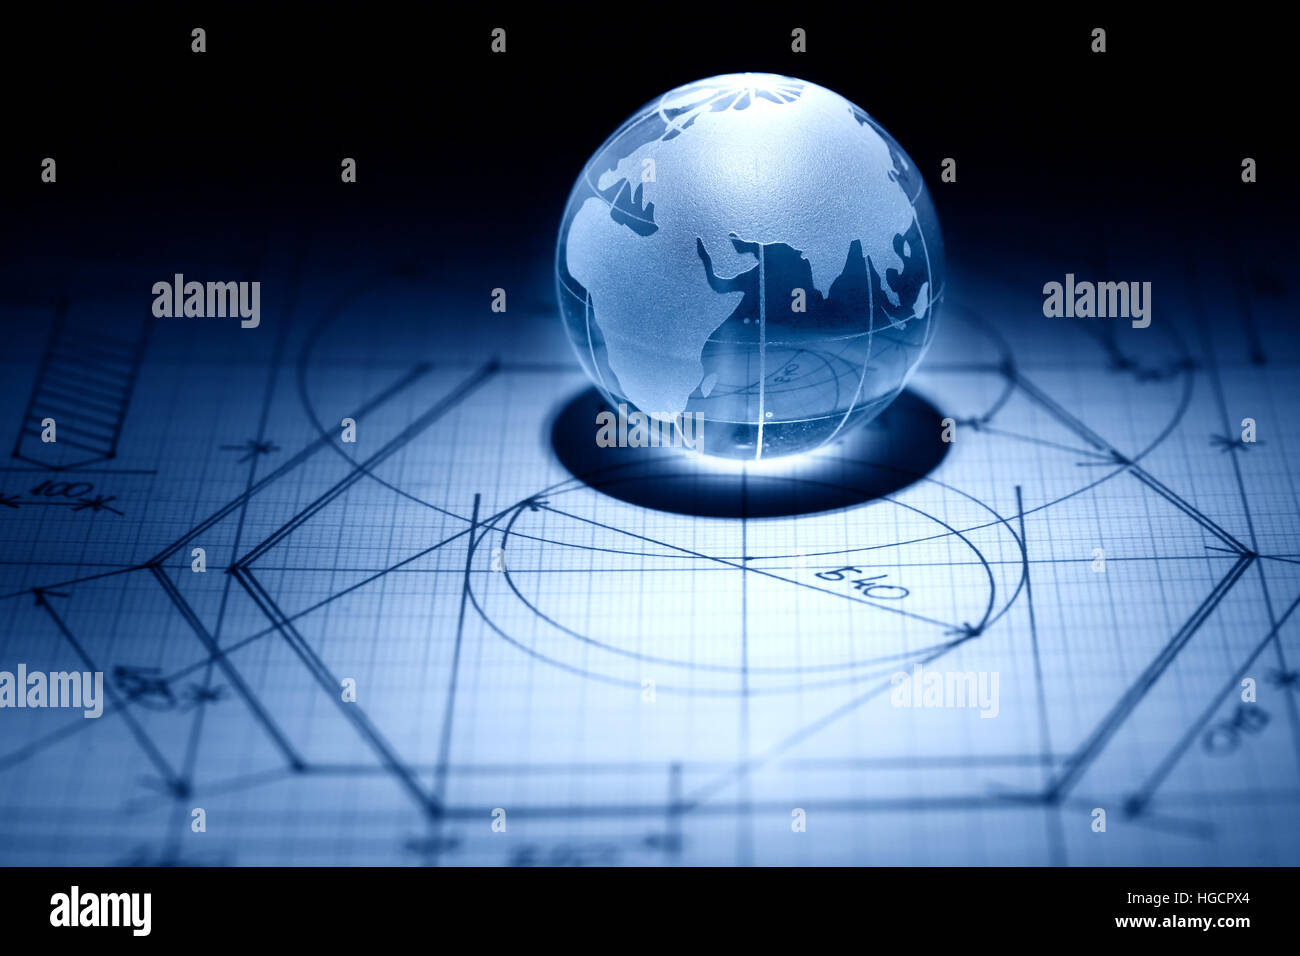 Business concept. Glass globe on graph paper surface with draft Stock Photo